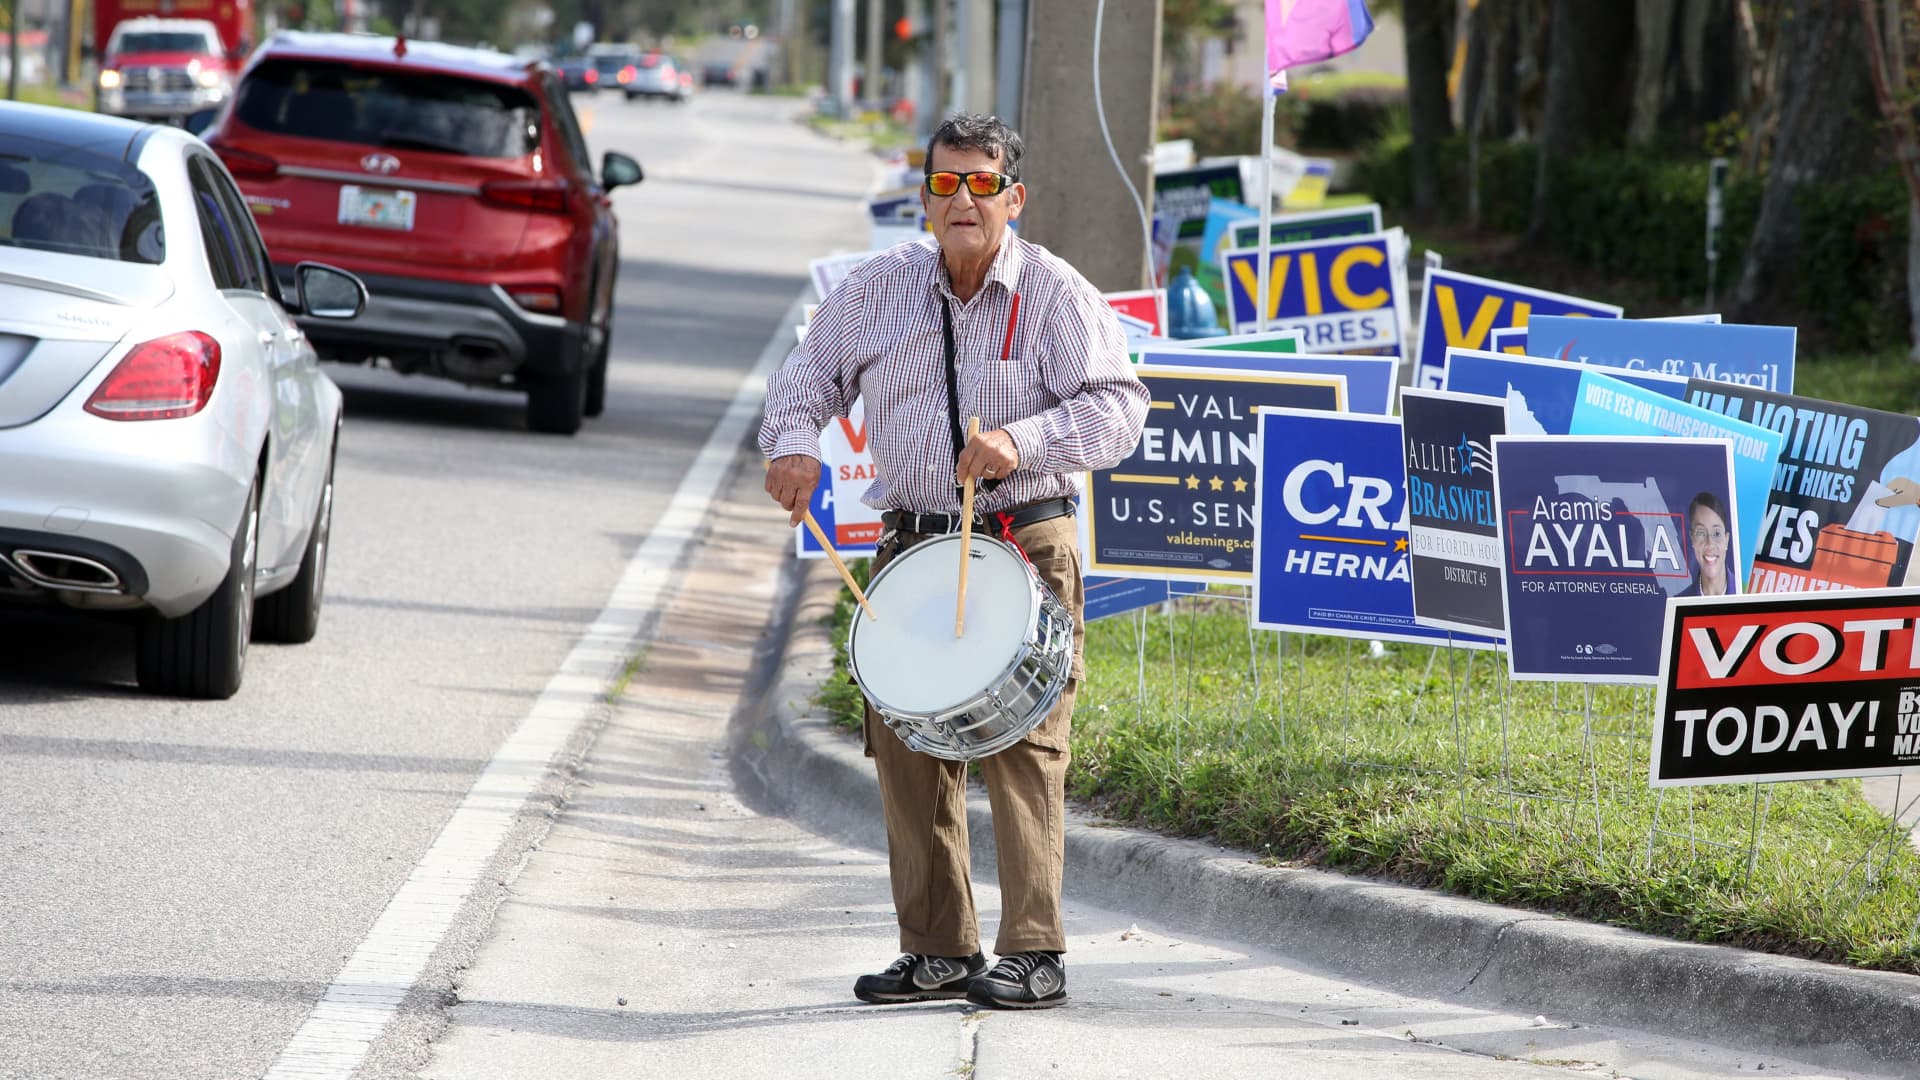 Eliot Letelier bangs on a drum, urging commuters to vote in the November 8 midterm elections in Orlando, Florida on November 7, 2022.